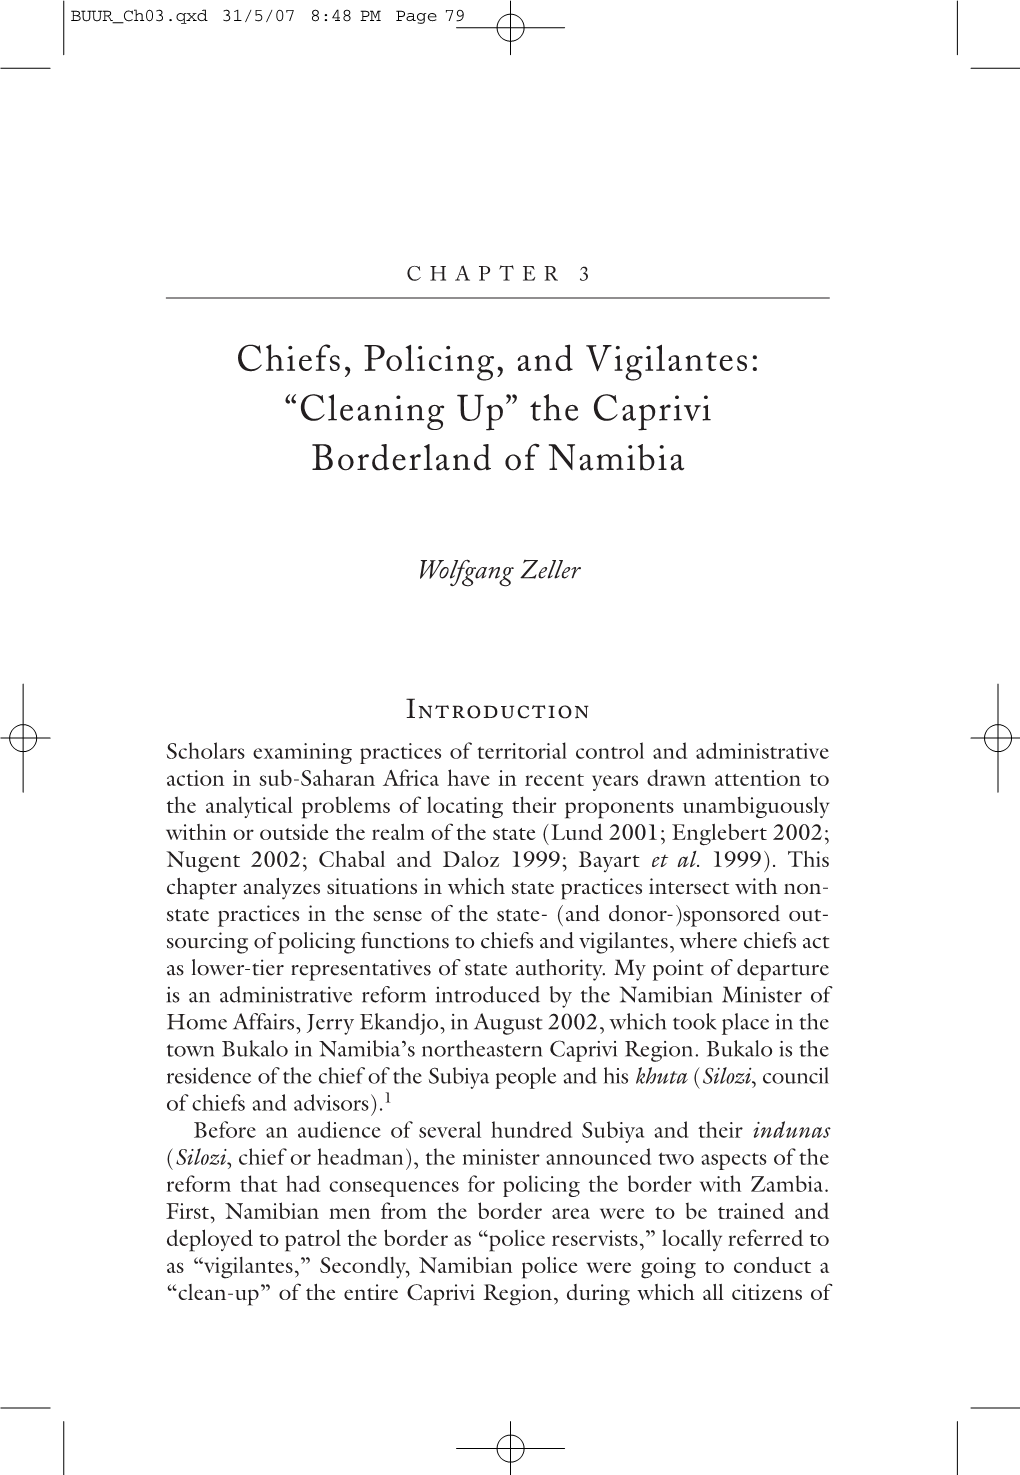 Chiefs, Policing, and Vigilantes: “Cleaning Up” the Caprivi Borderland of Namibia